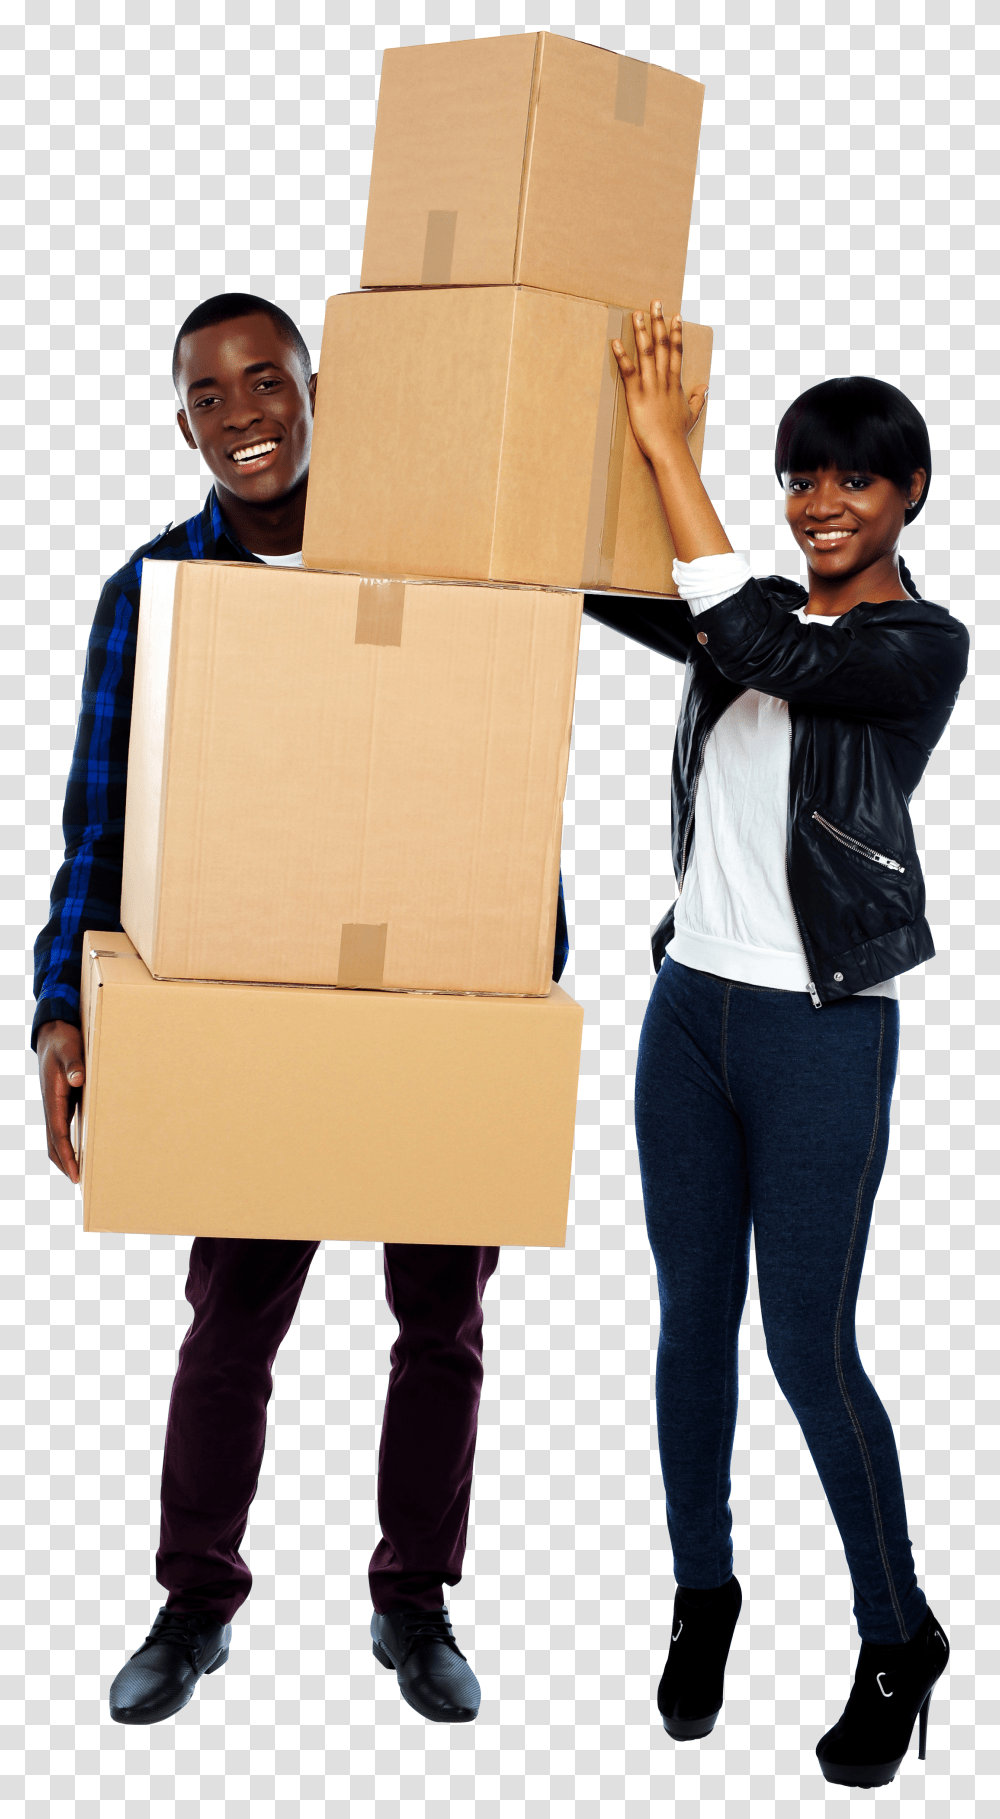 Download Packing Free Commercial Use Image Moving People With Box Transparent Png